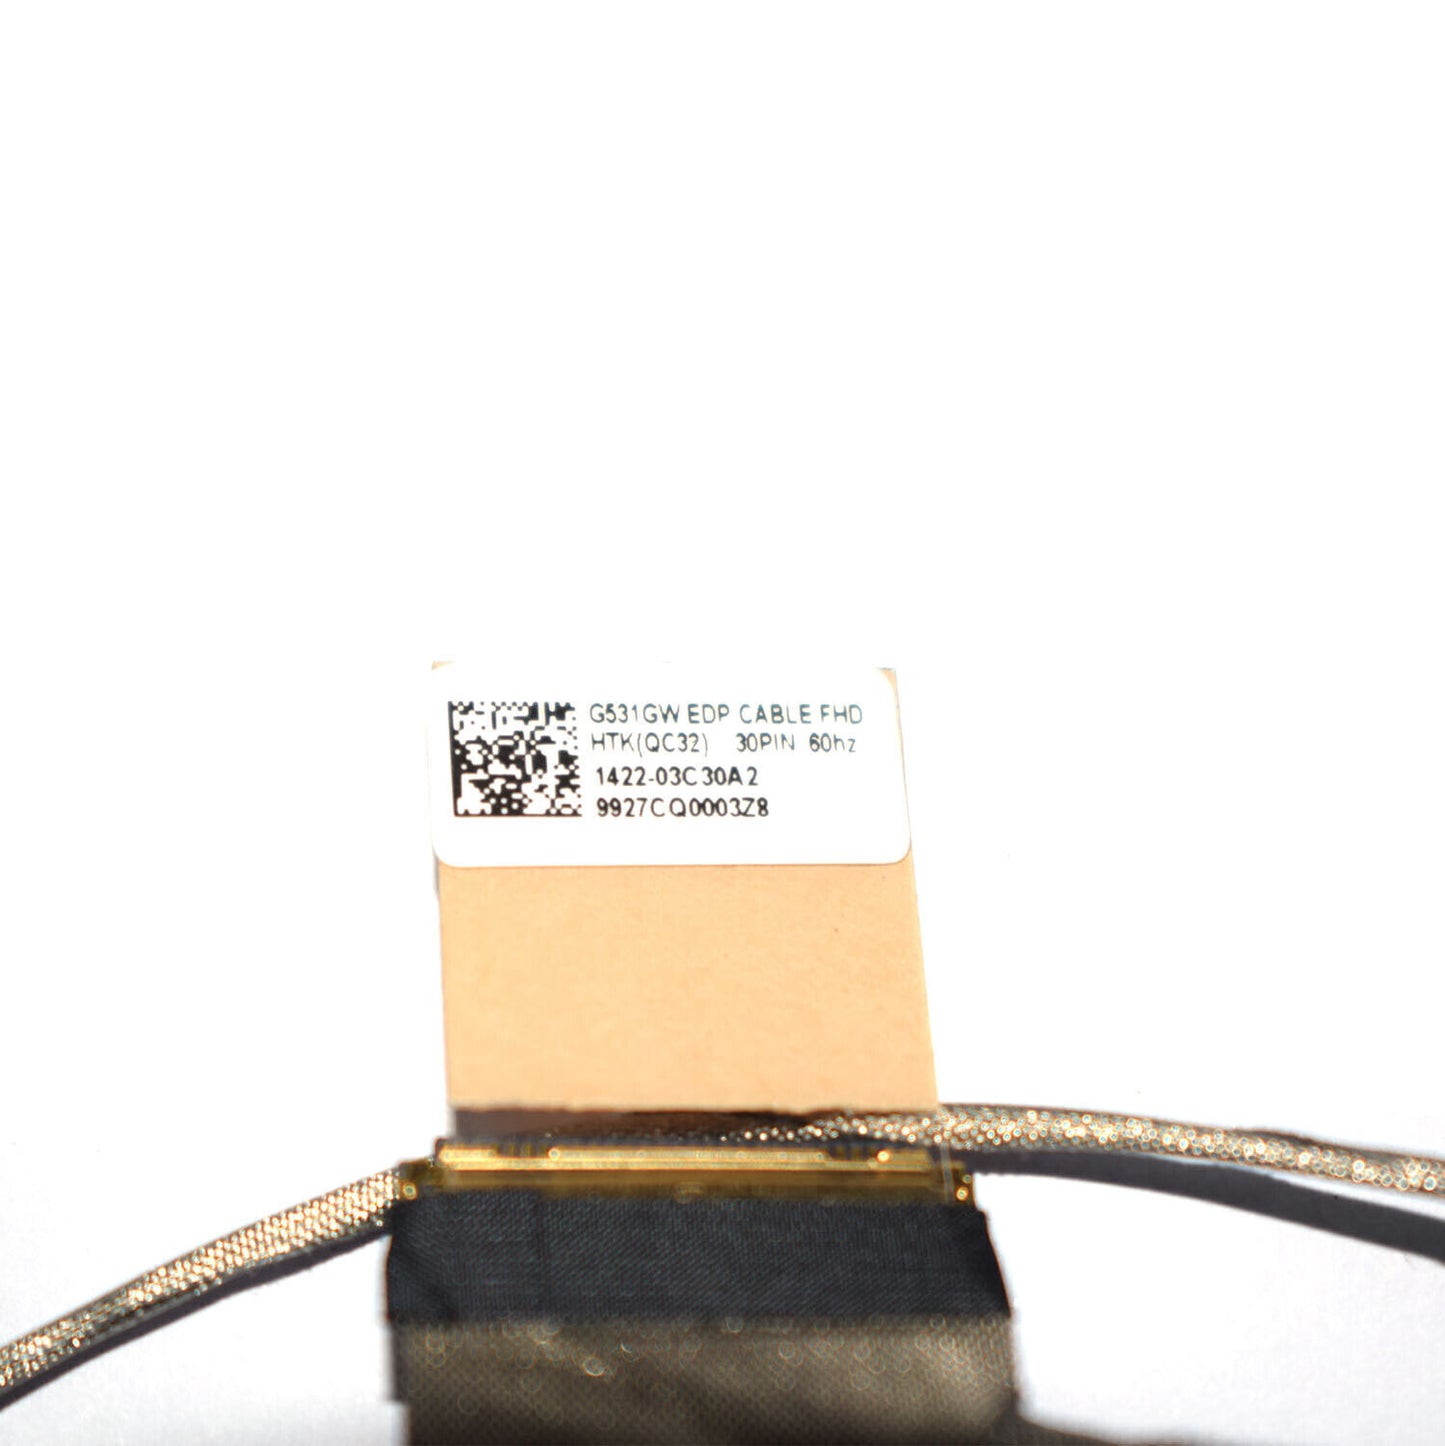 ASUS 1422-03C30A2 LCD Display Video Screen Cable G531G G531GT G531GW